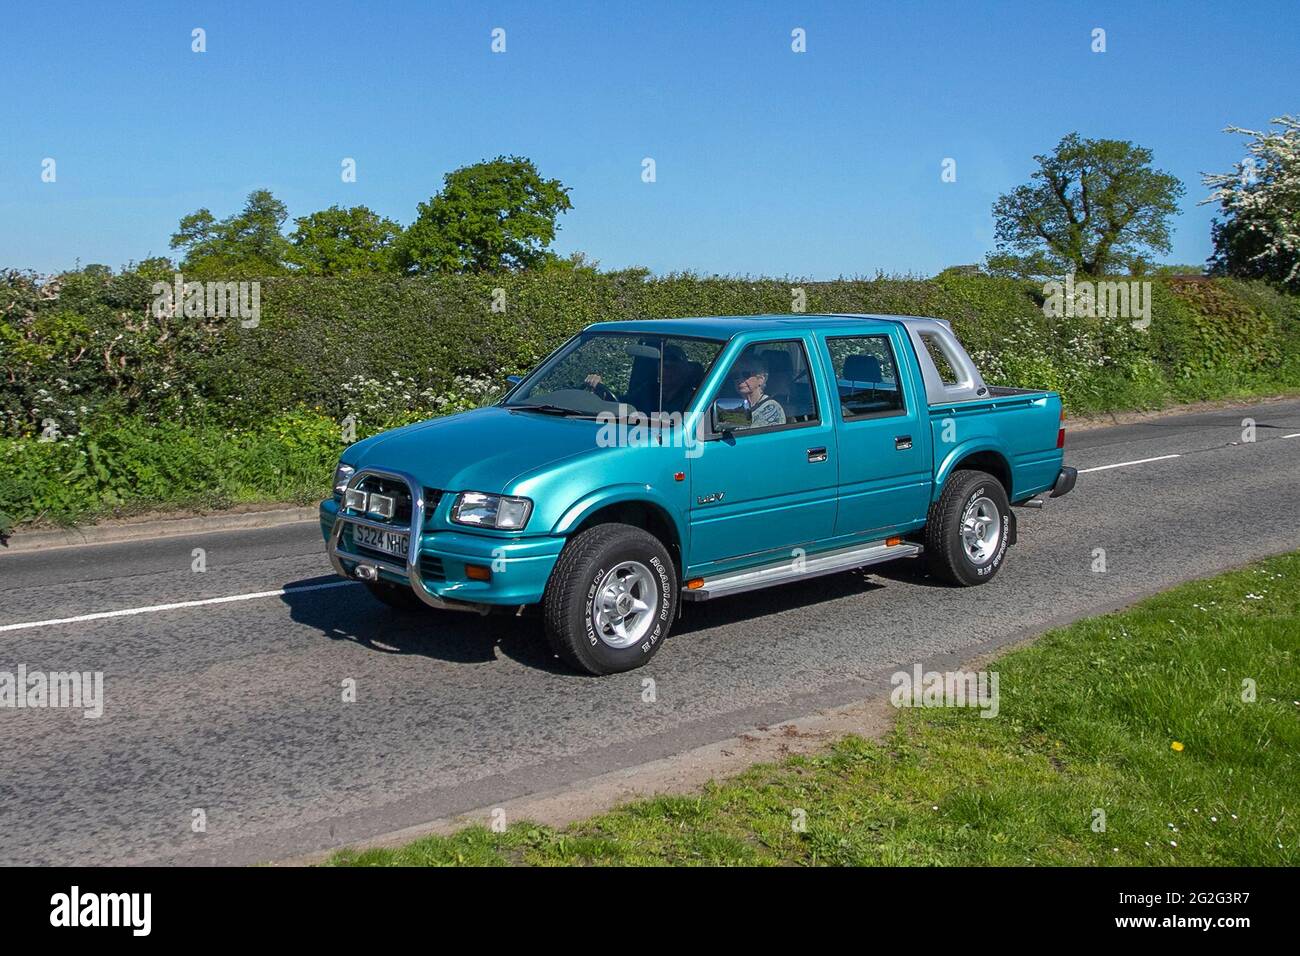 1998 90s nineties Isuzu KB blue 2800cc diesel, double cab pickup, en-route to Capesthorne Hall classic May car show, Cheshire, UK Stock Photo